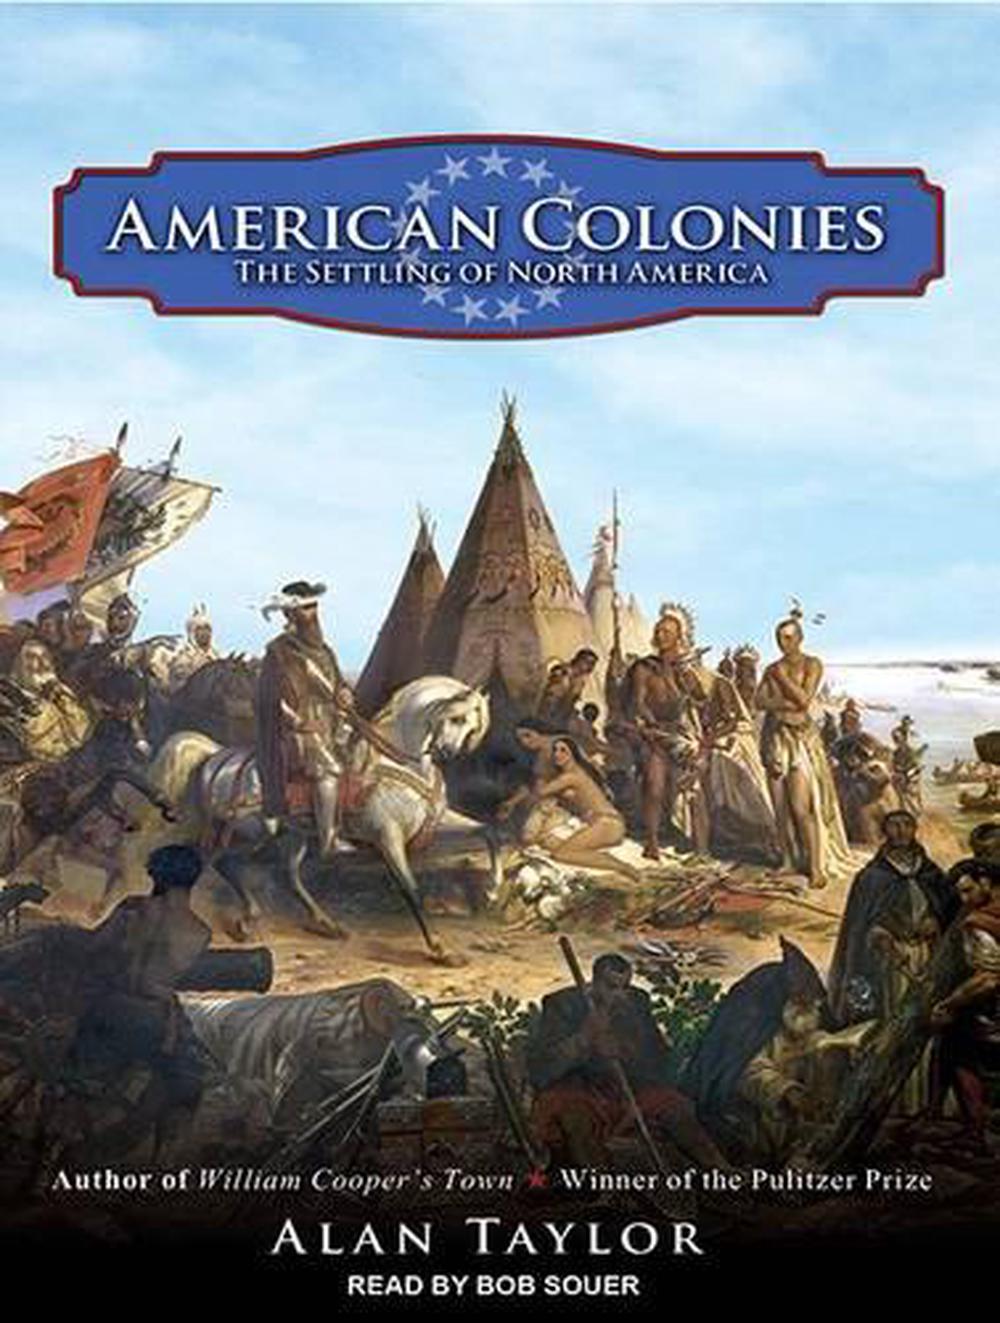 American Colonies The Settling of North America by Alan Taylor